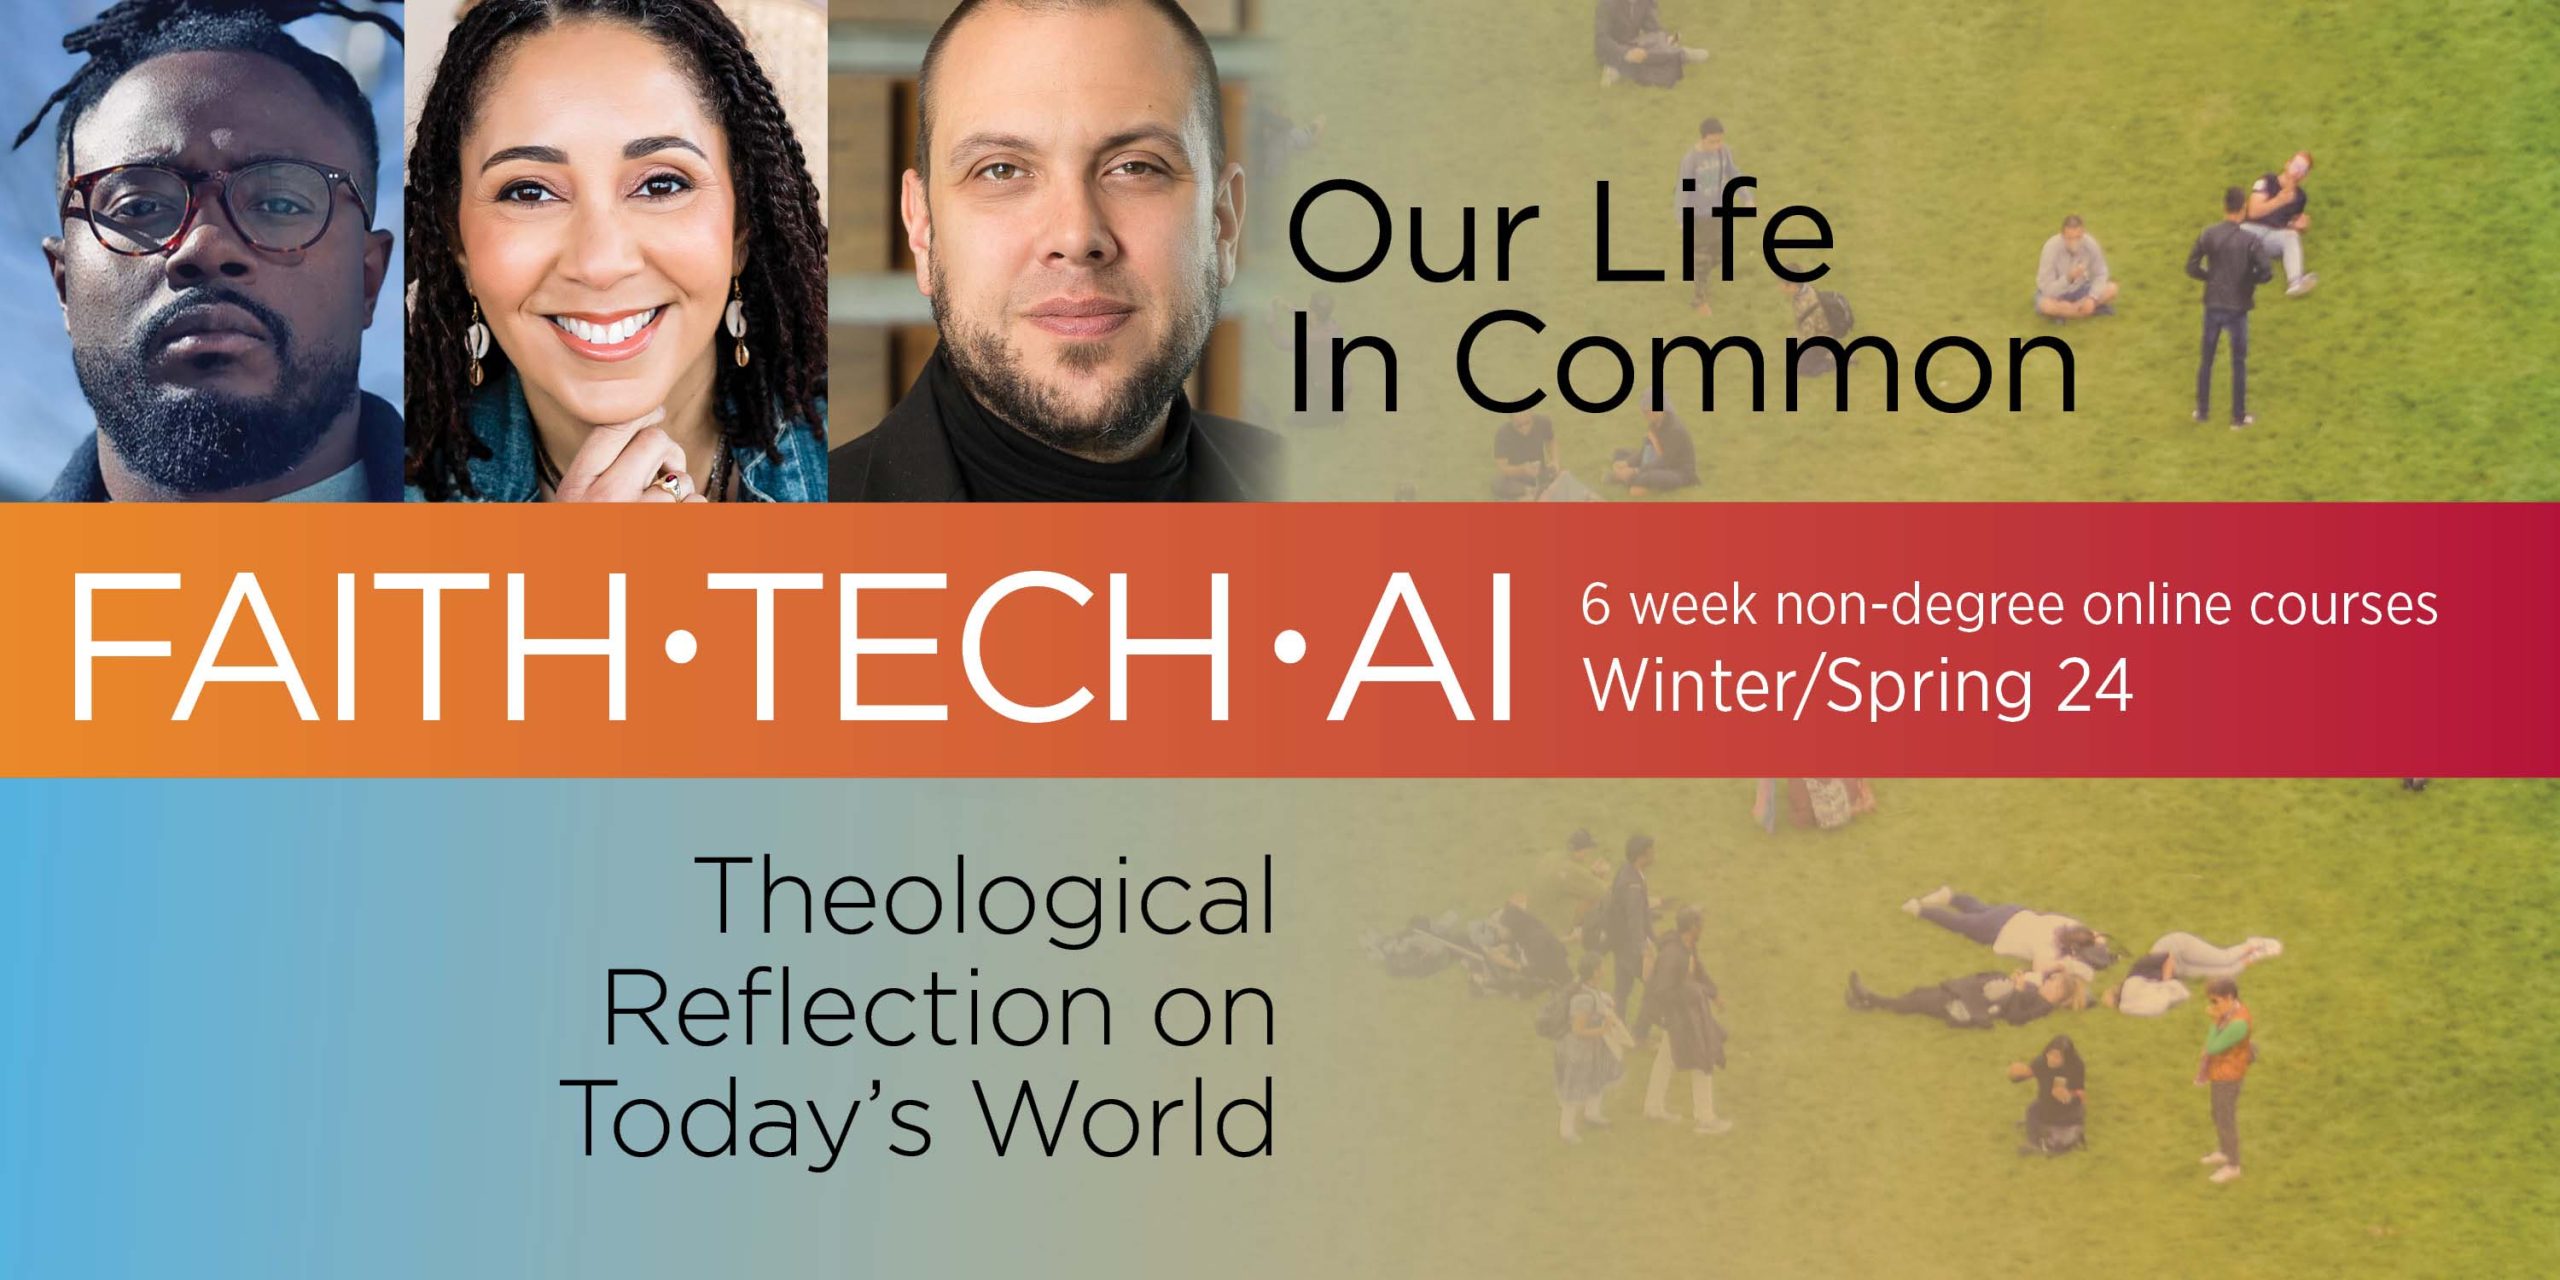 Faith, Tech, & AI - 6 week non-degree online courses in the Winter/Spring 24 - Theological Reflection on Today's World